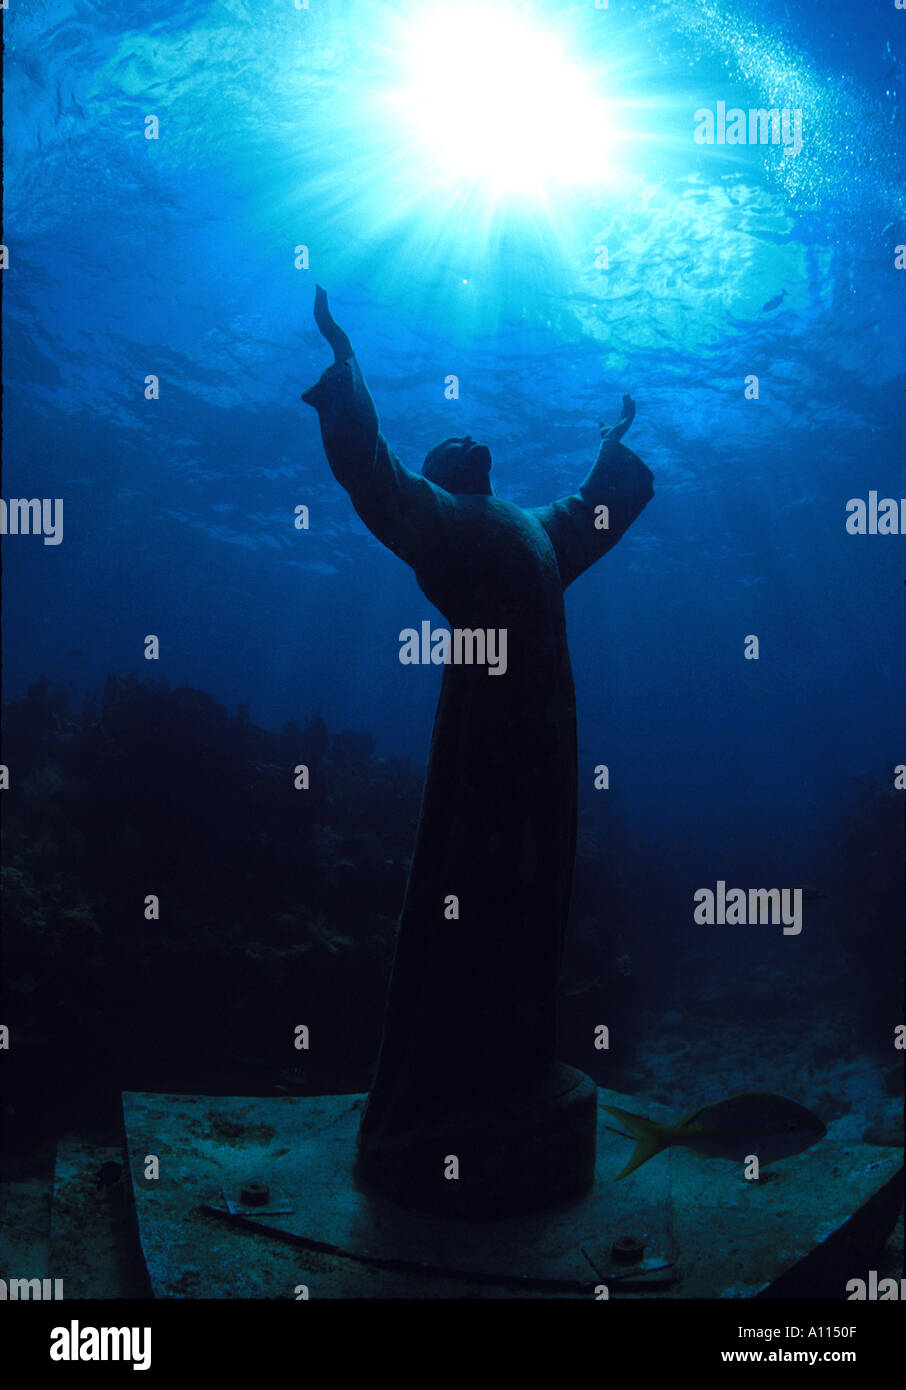 A SILHOUETTE OF THE STATUE OF CHRIST OF THE ABYSS LOCATED ON A REEF IN THE FLORIDA KEYS Stock Photo